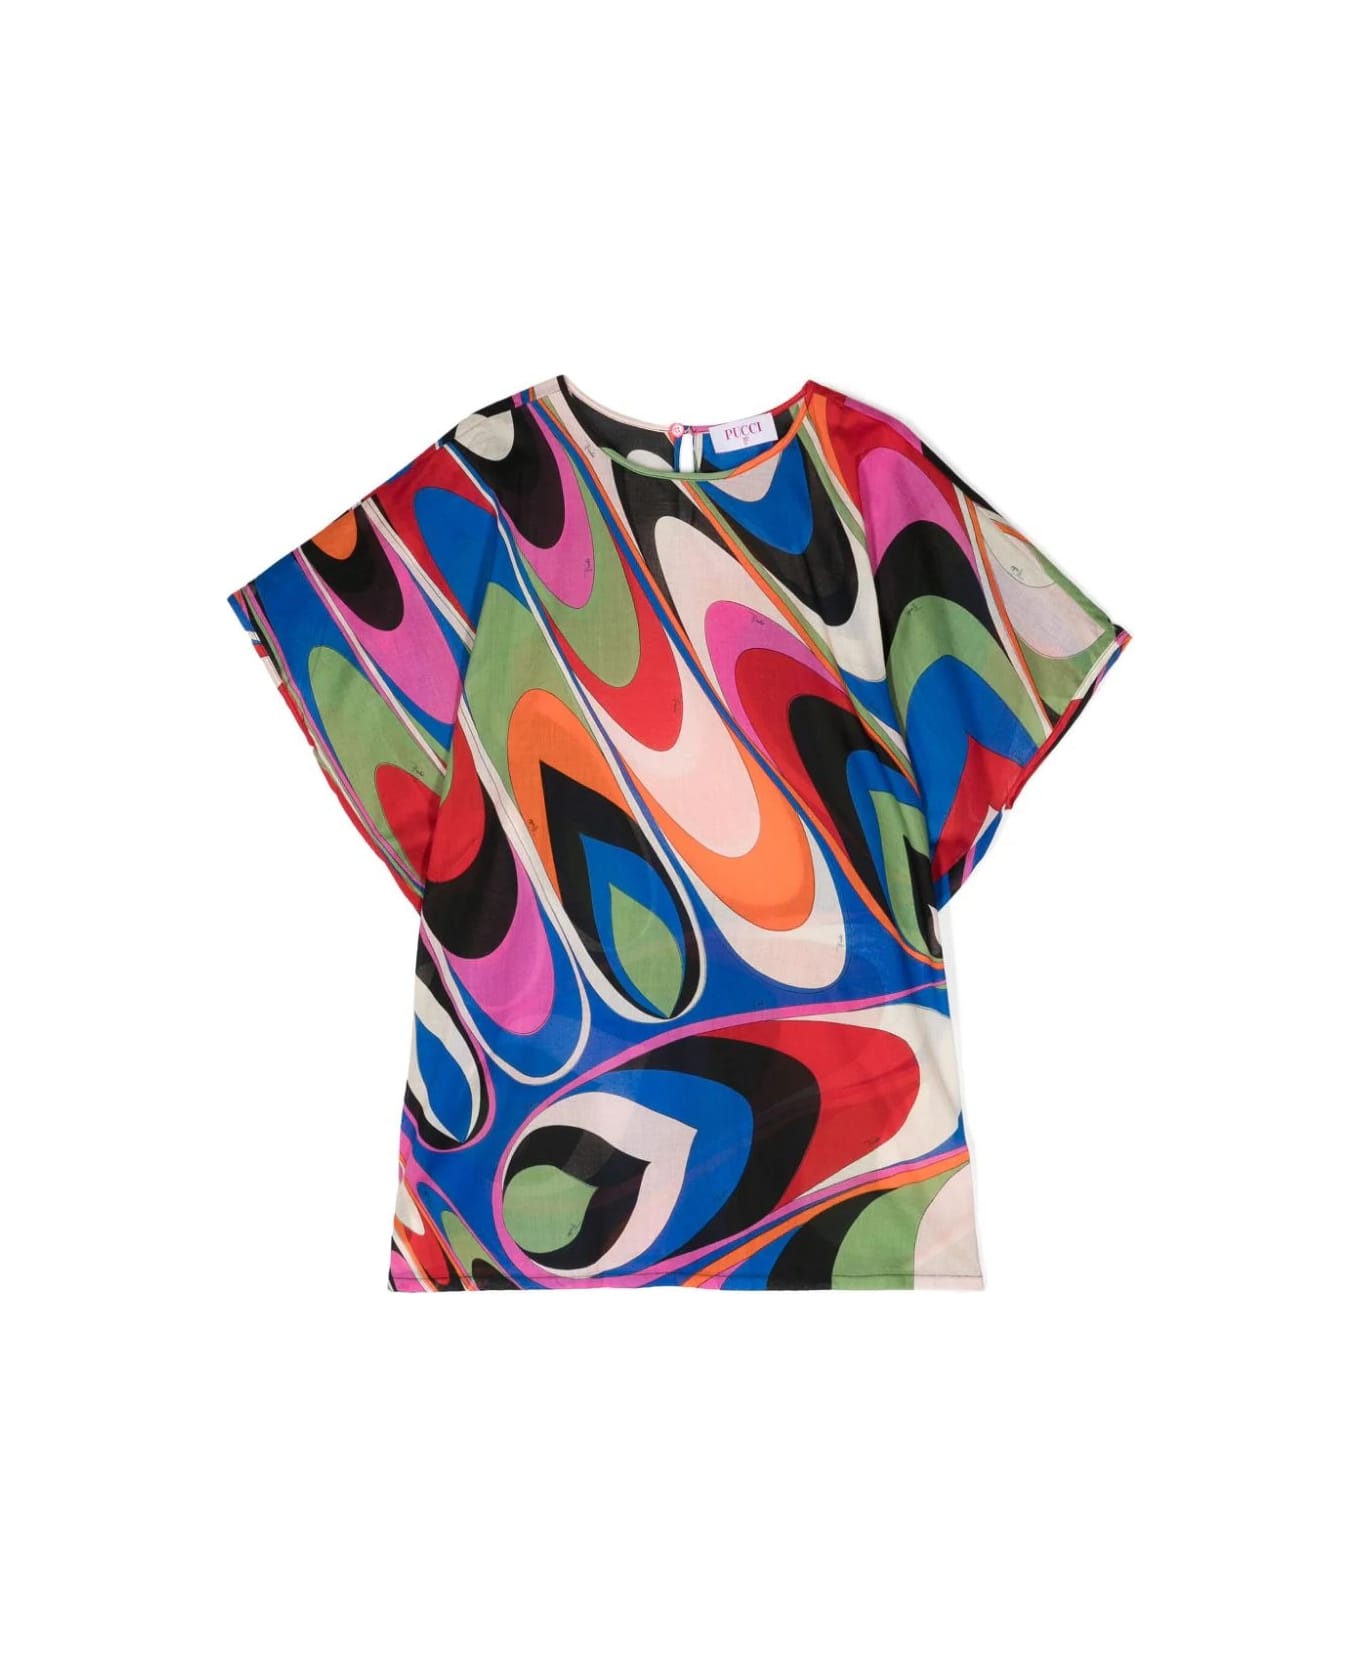 Pucci Multicoloured Waves Print Short Sleeved Dress - Multicolour